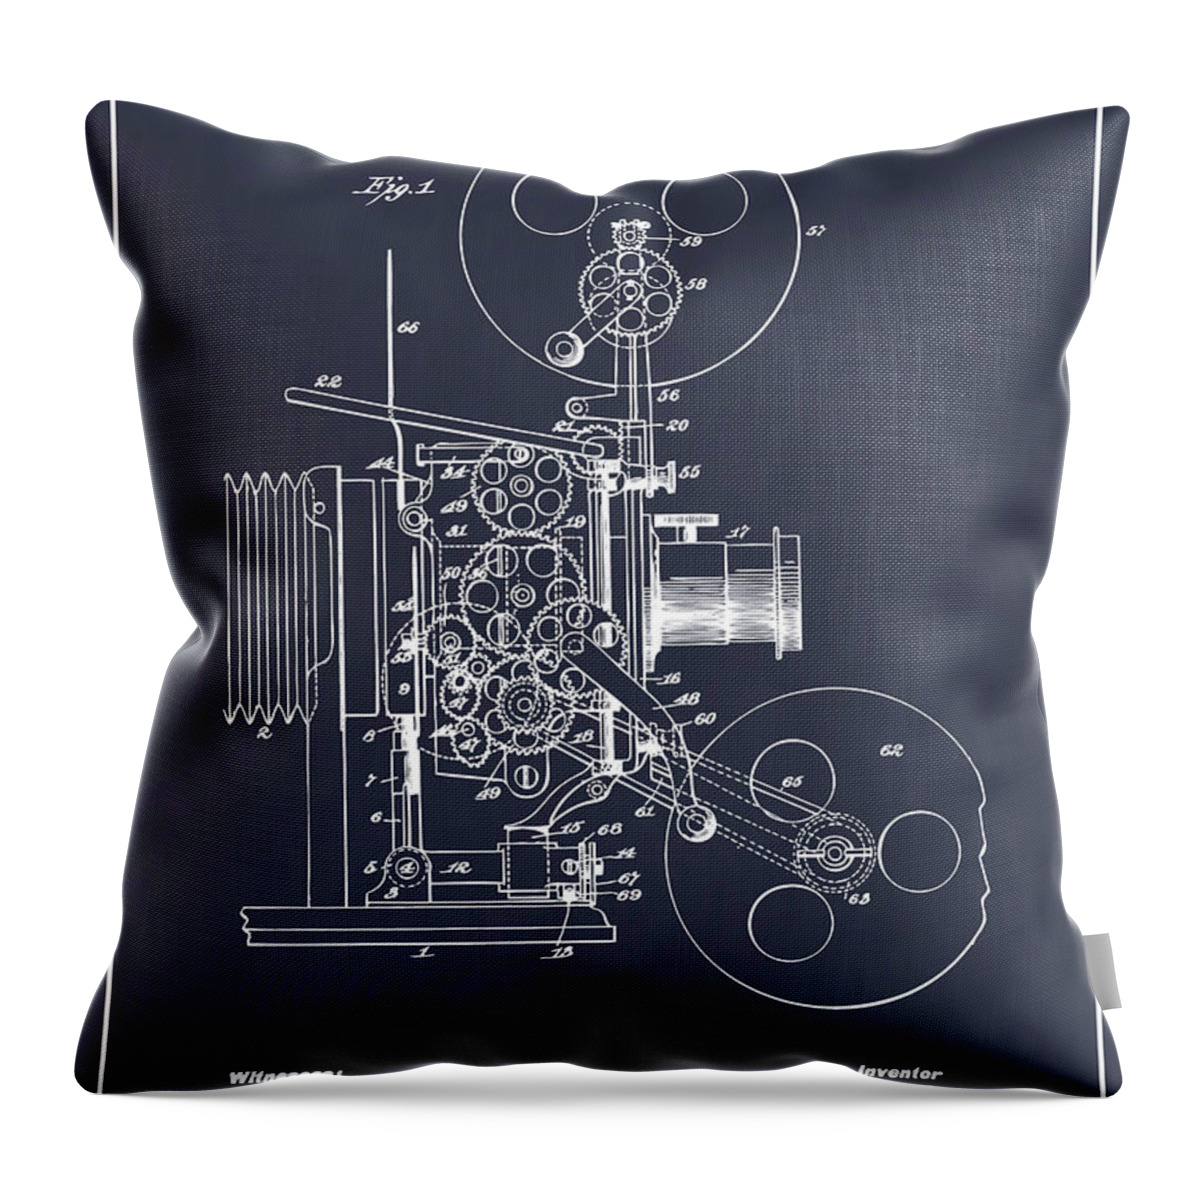 1902 Projecting Kinetoscope Patent Print Throw Pillow featuring the drawing 1902 Projecting Kinetoscope Blackboard Patent Print by Greg Edwards